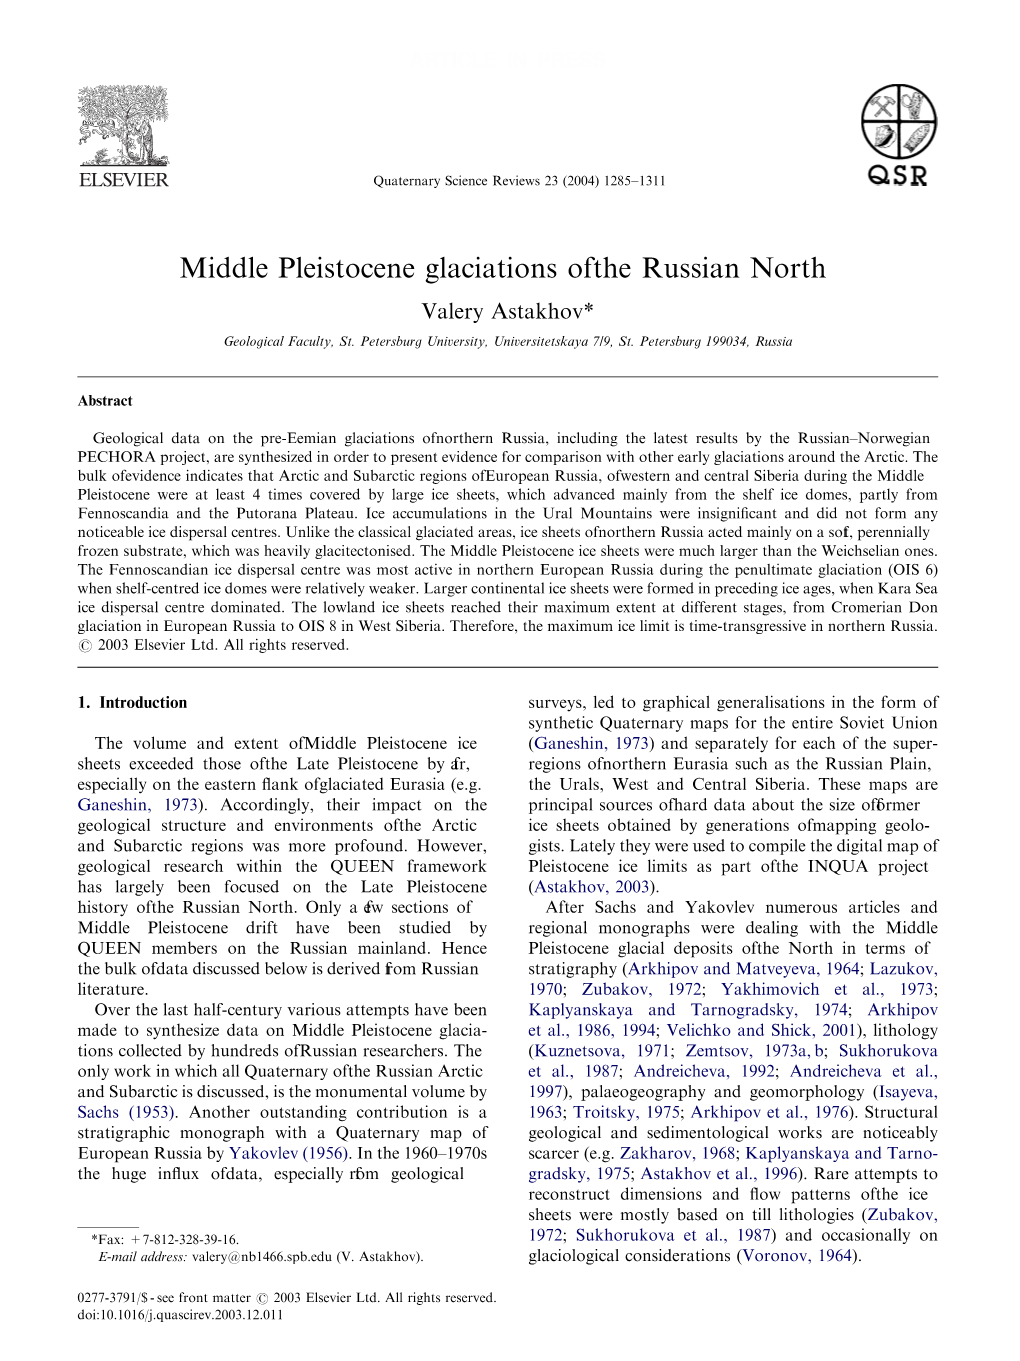 Astakhov V. 2004. Middle Pleistocene Glaciations of the Russian North